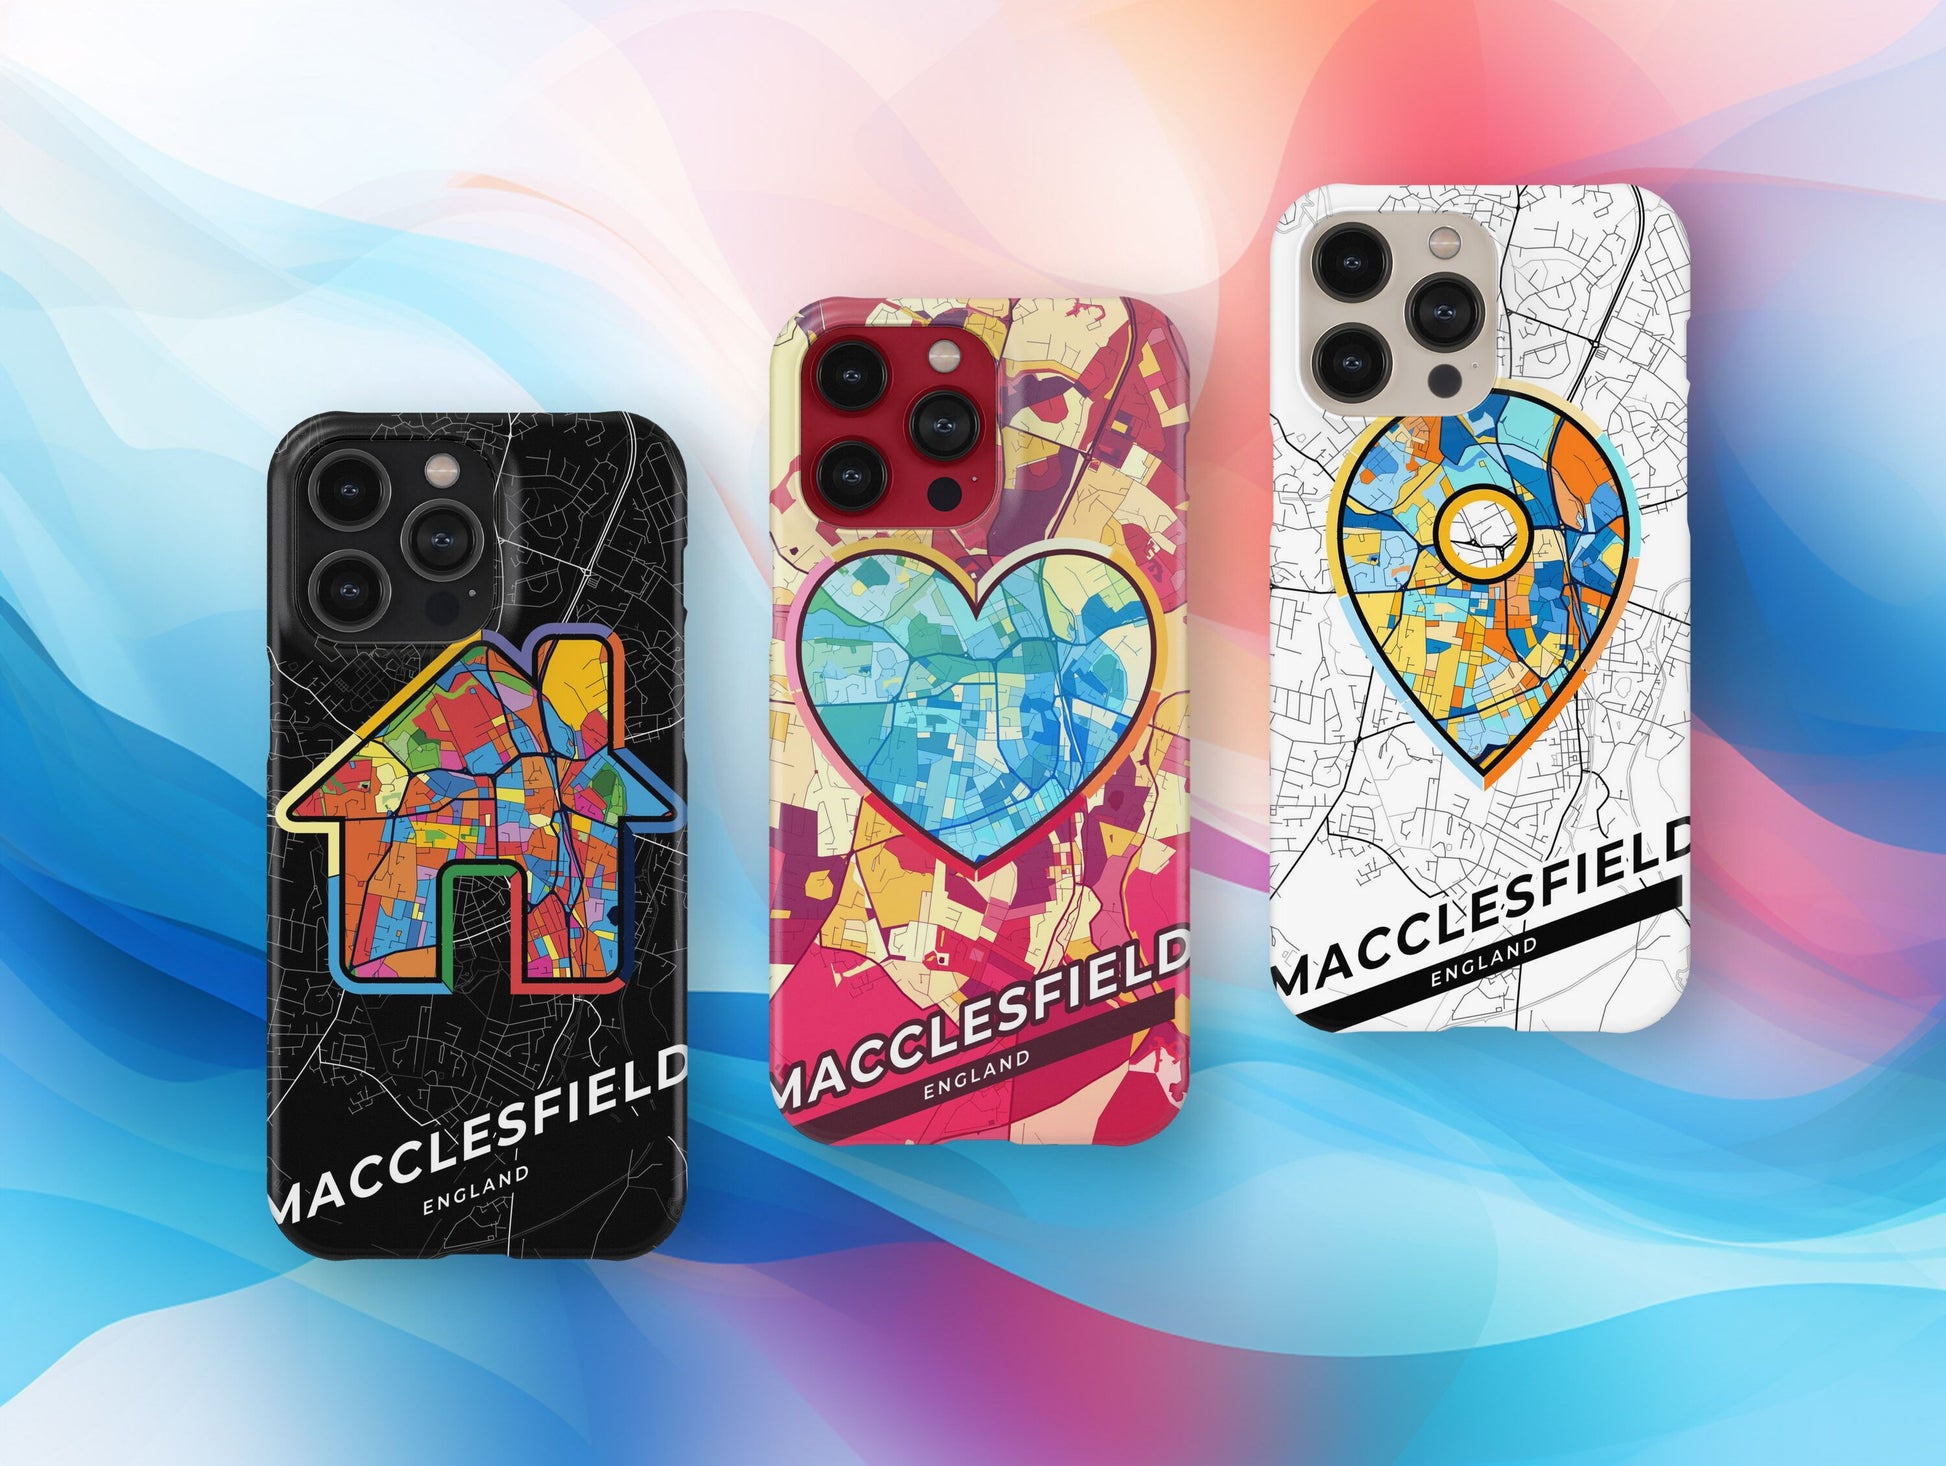 Macclesfield England slim phone case with colorful icon. Birthday, wedding or housewarming gift. Couple match cases.